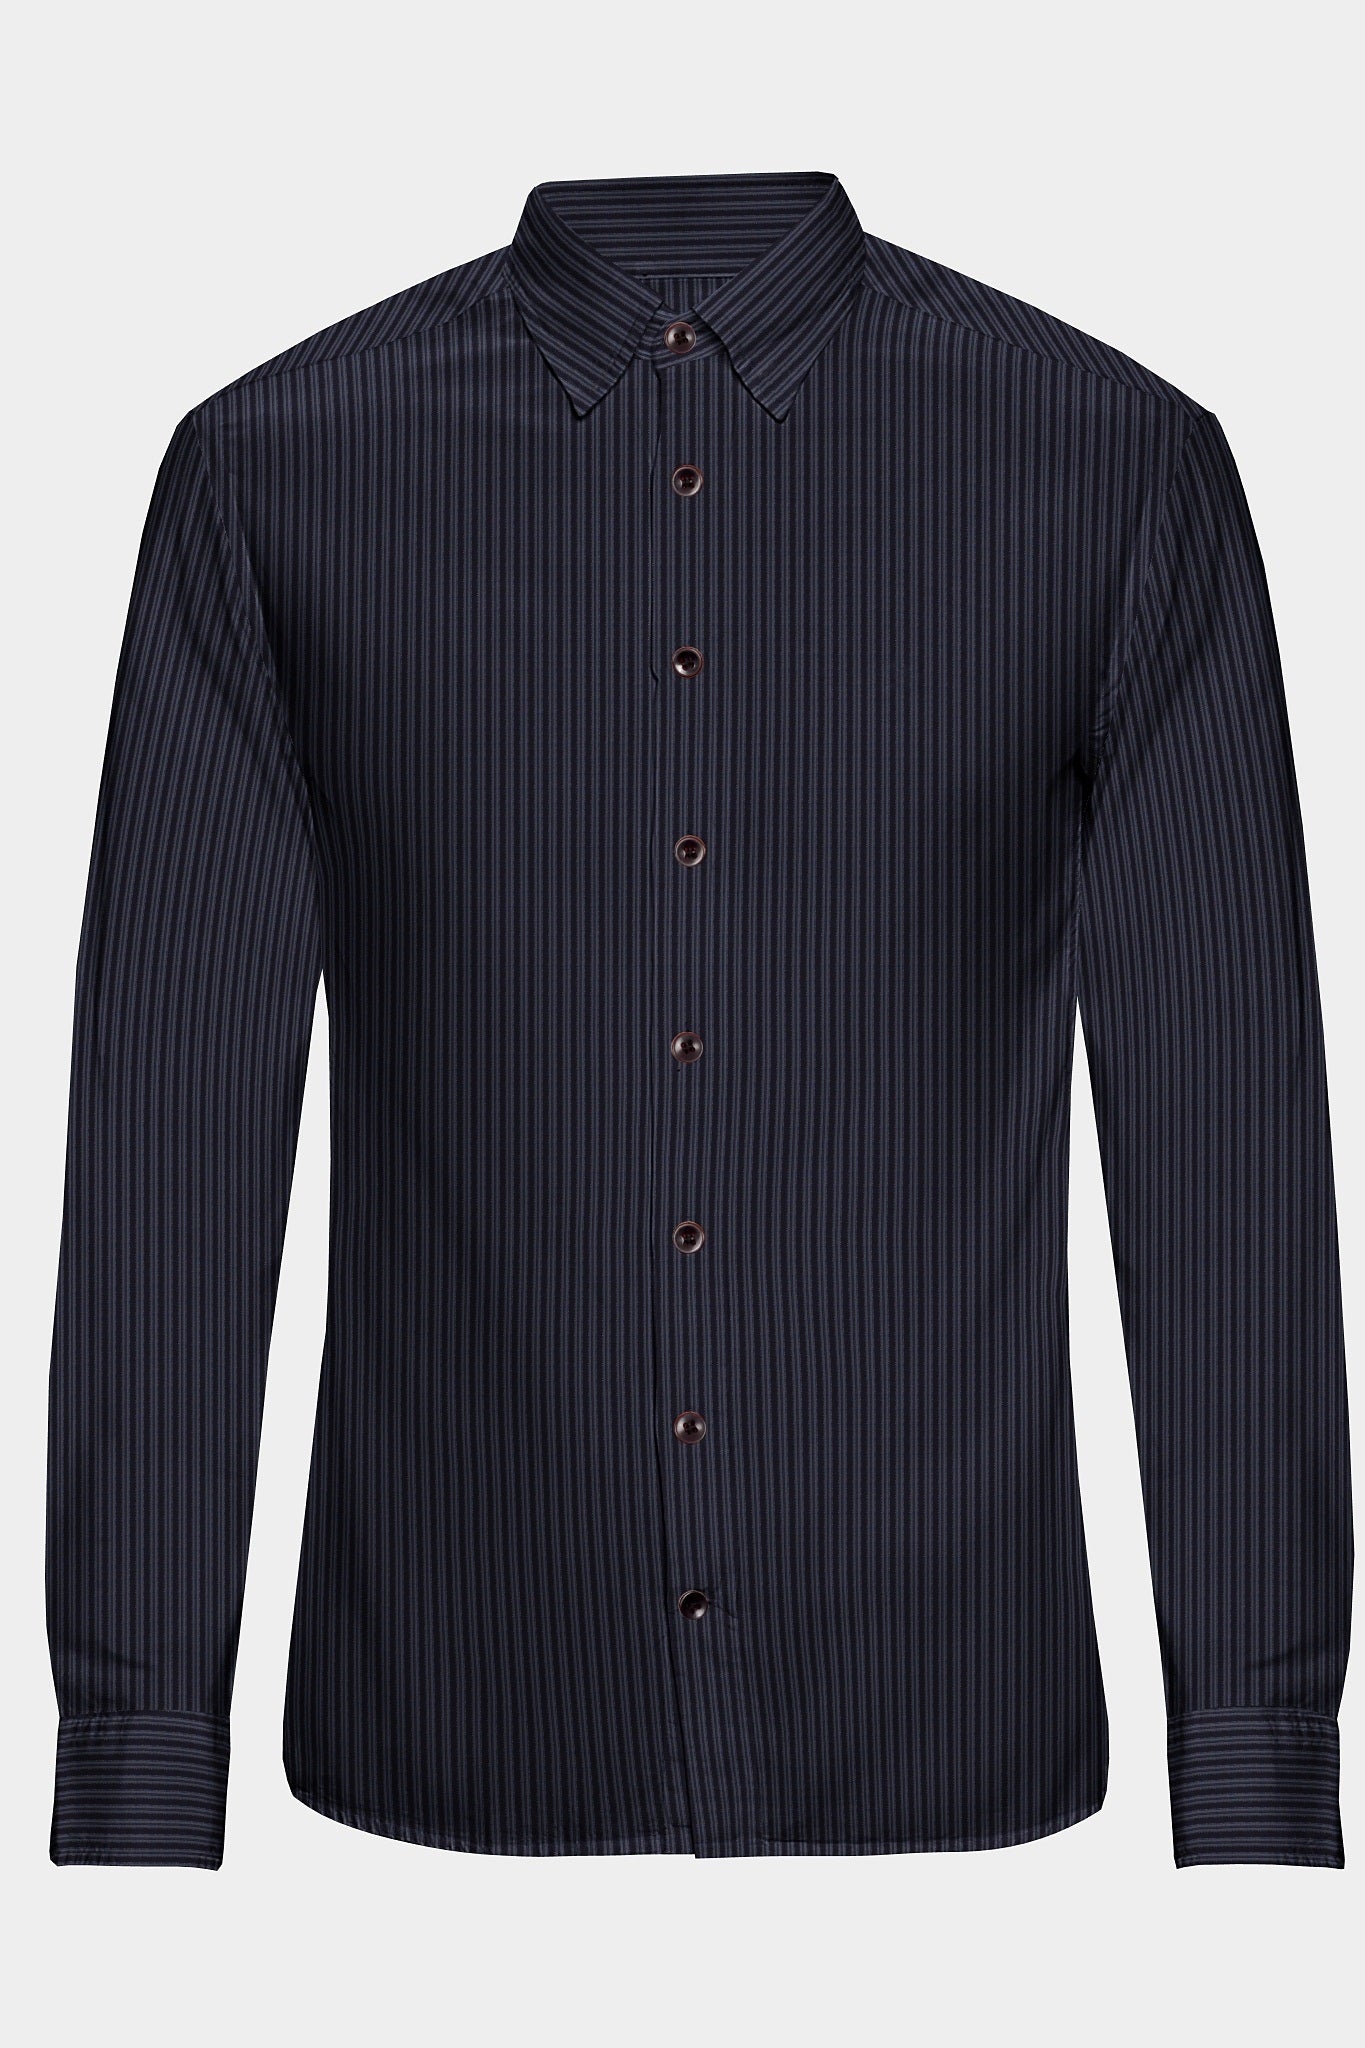 Charcoal Black with Steel Grey Stripes Cotton Shirt